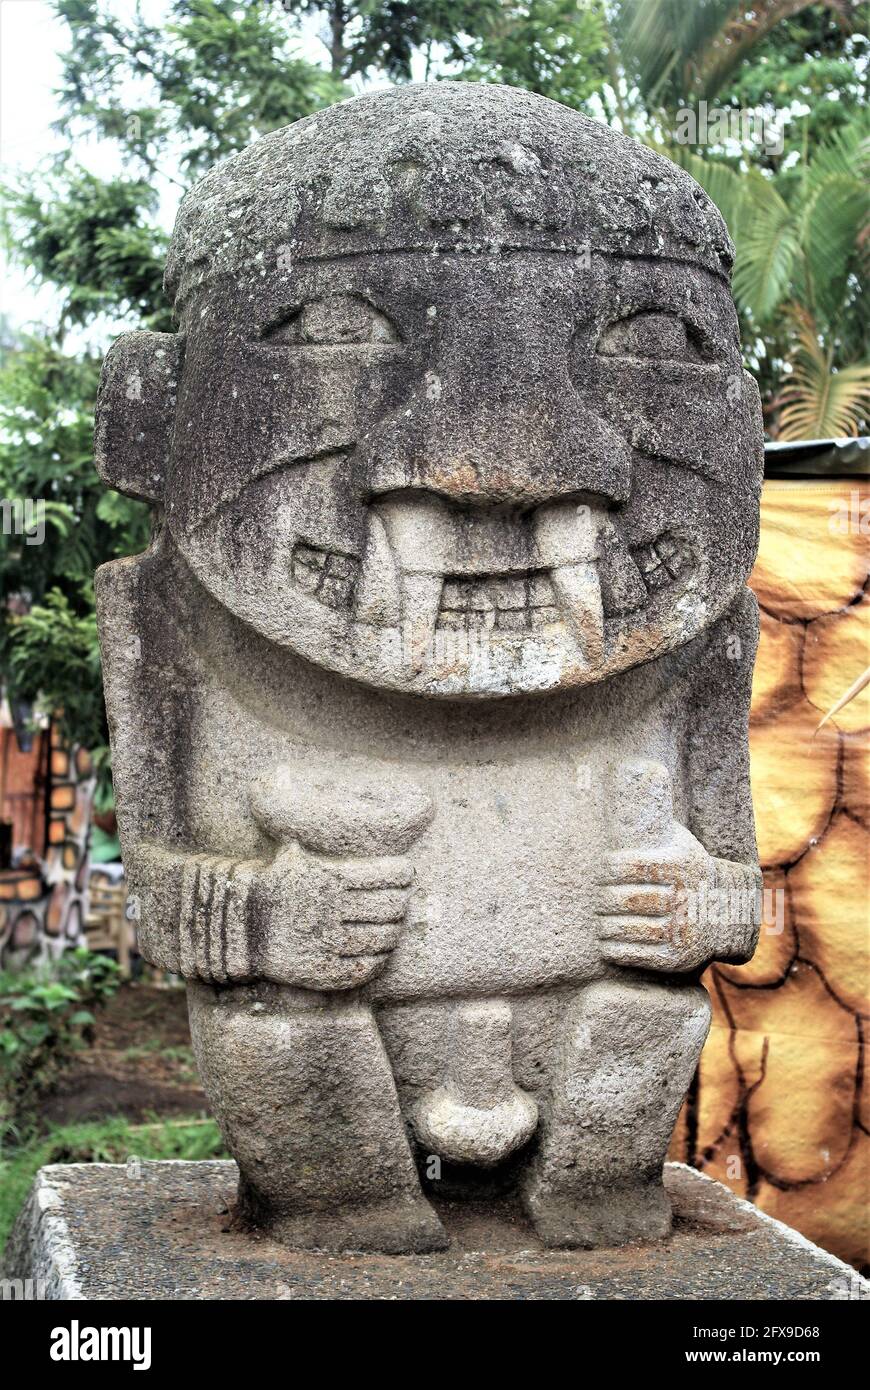 Ancient sculpture from burial site placed in the main square, San Agustin, Colombia, South America Stock Photo